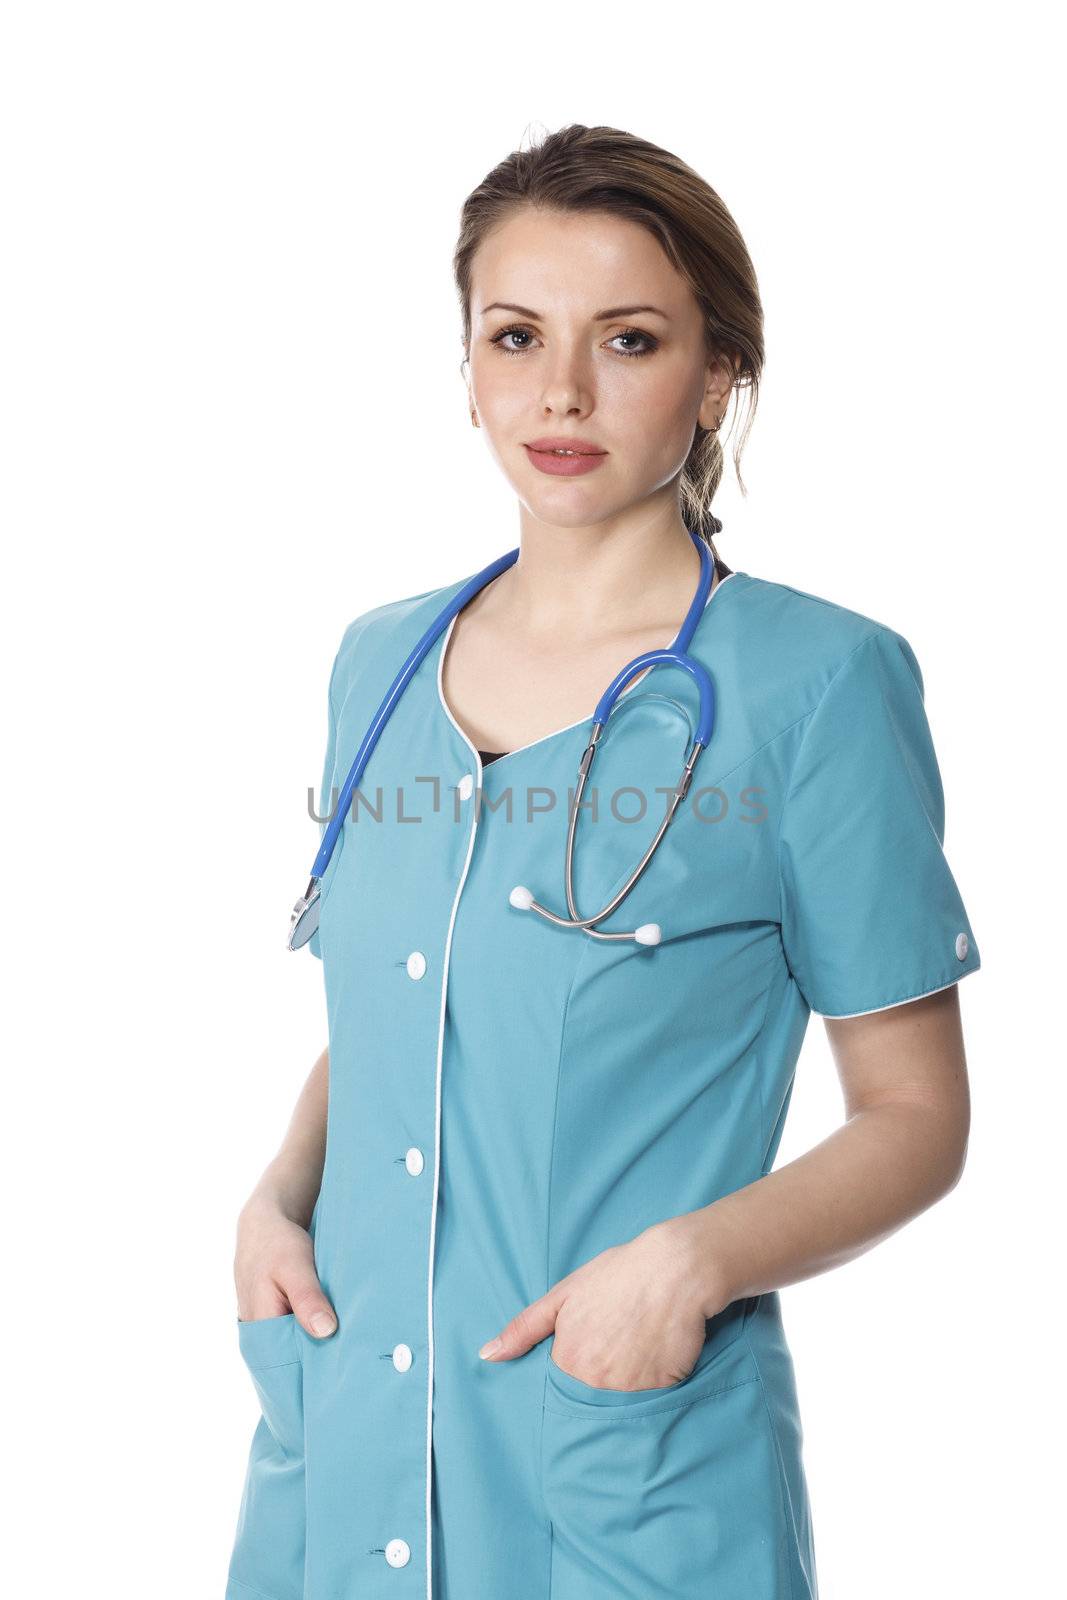 Woman doctor posing against white background